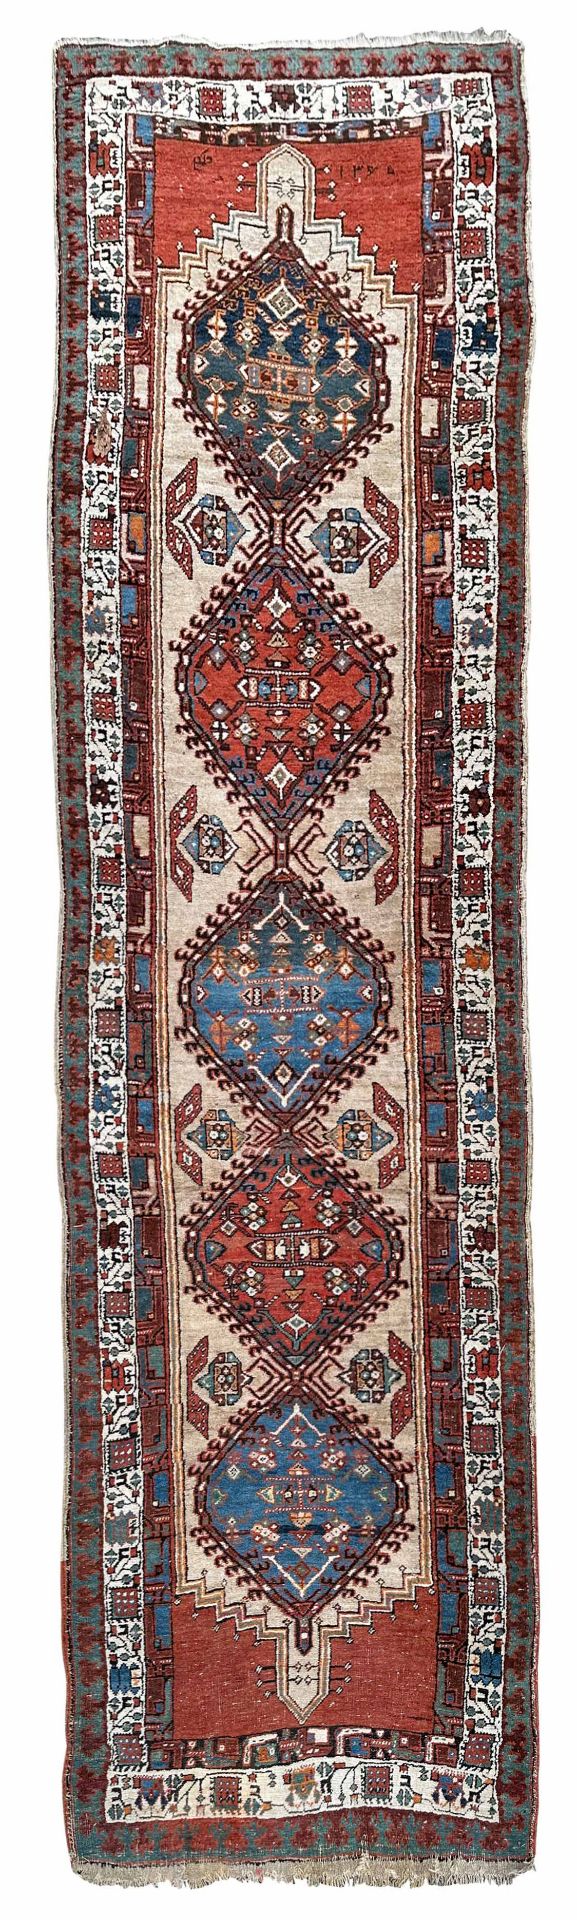 Sarab. oriental carpet. Circa 1900, signed and dated.